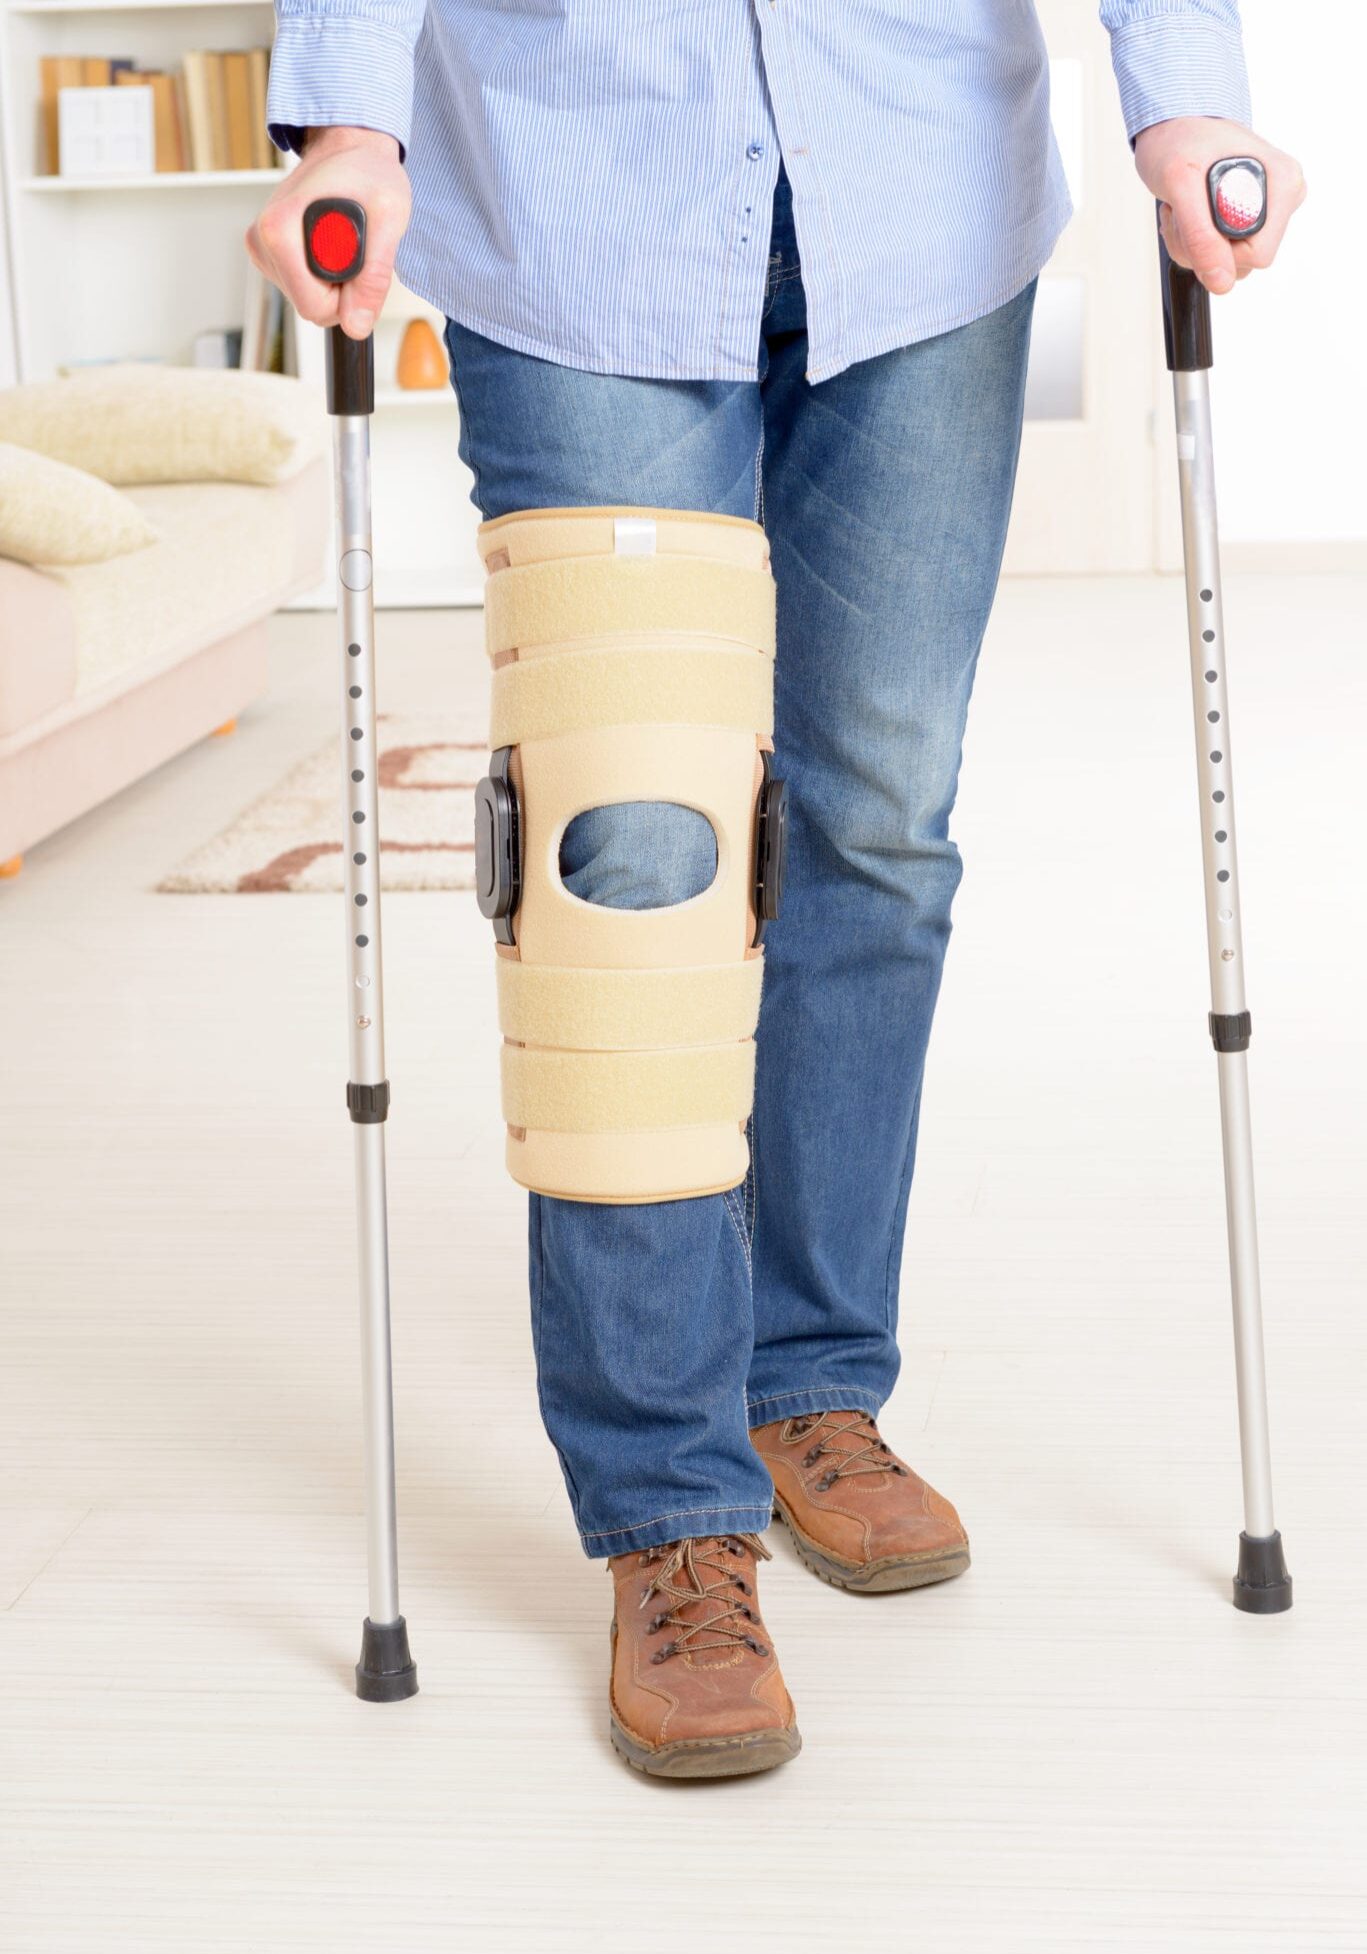 Job injury, workers compensation benefits, disability